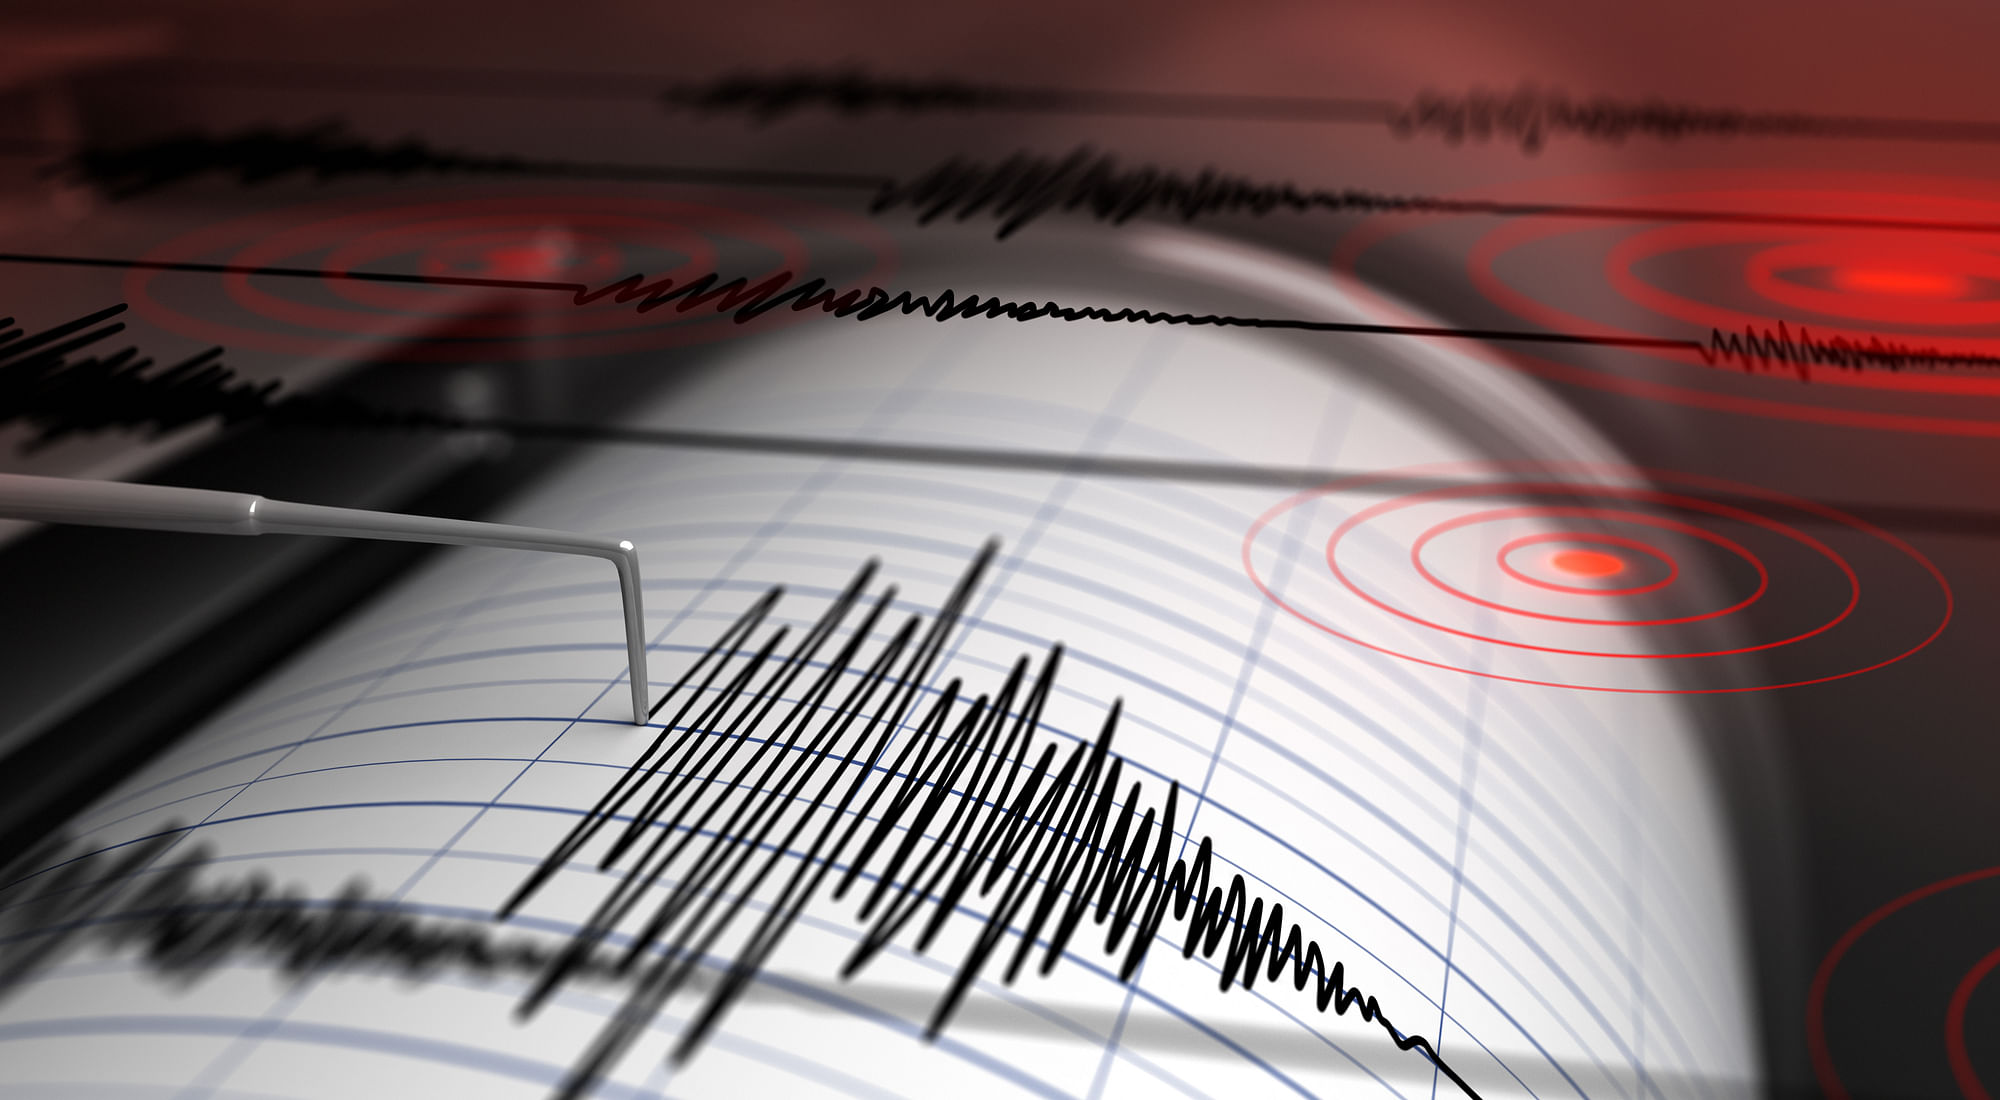 <div class="paragraphs"><p>The Delhi-NCR region experienced earthquake tremors at around 2:30pm on Tuesday, 24 January, according to multiple reports.</p></div>